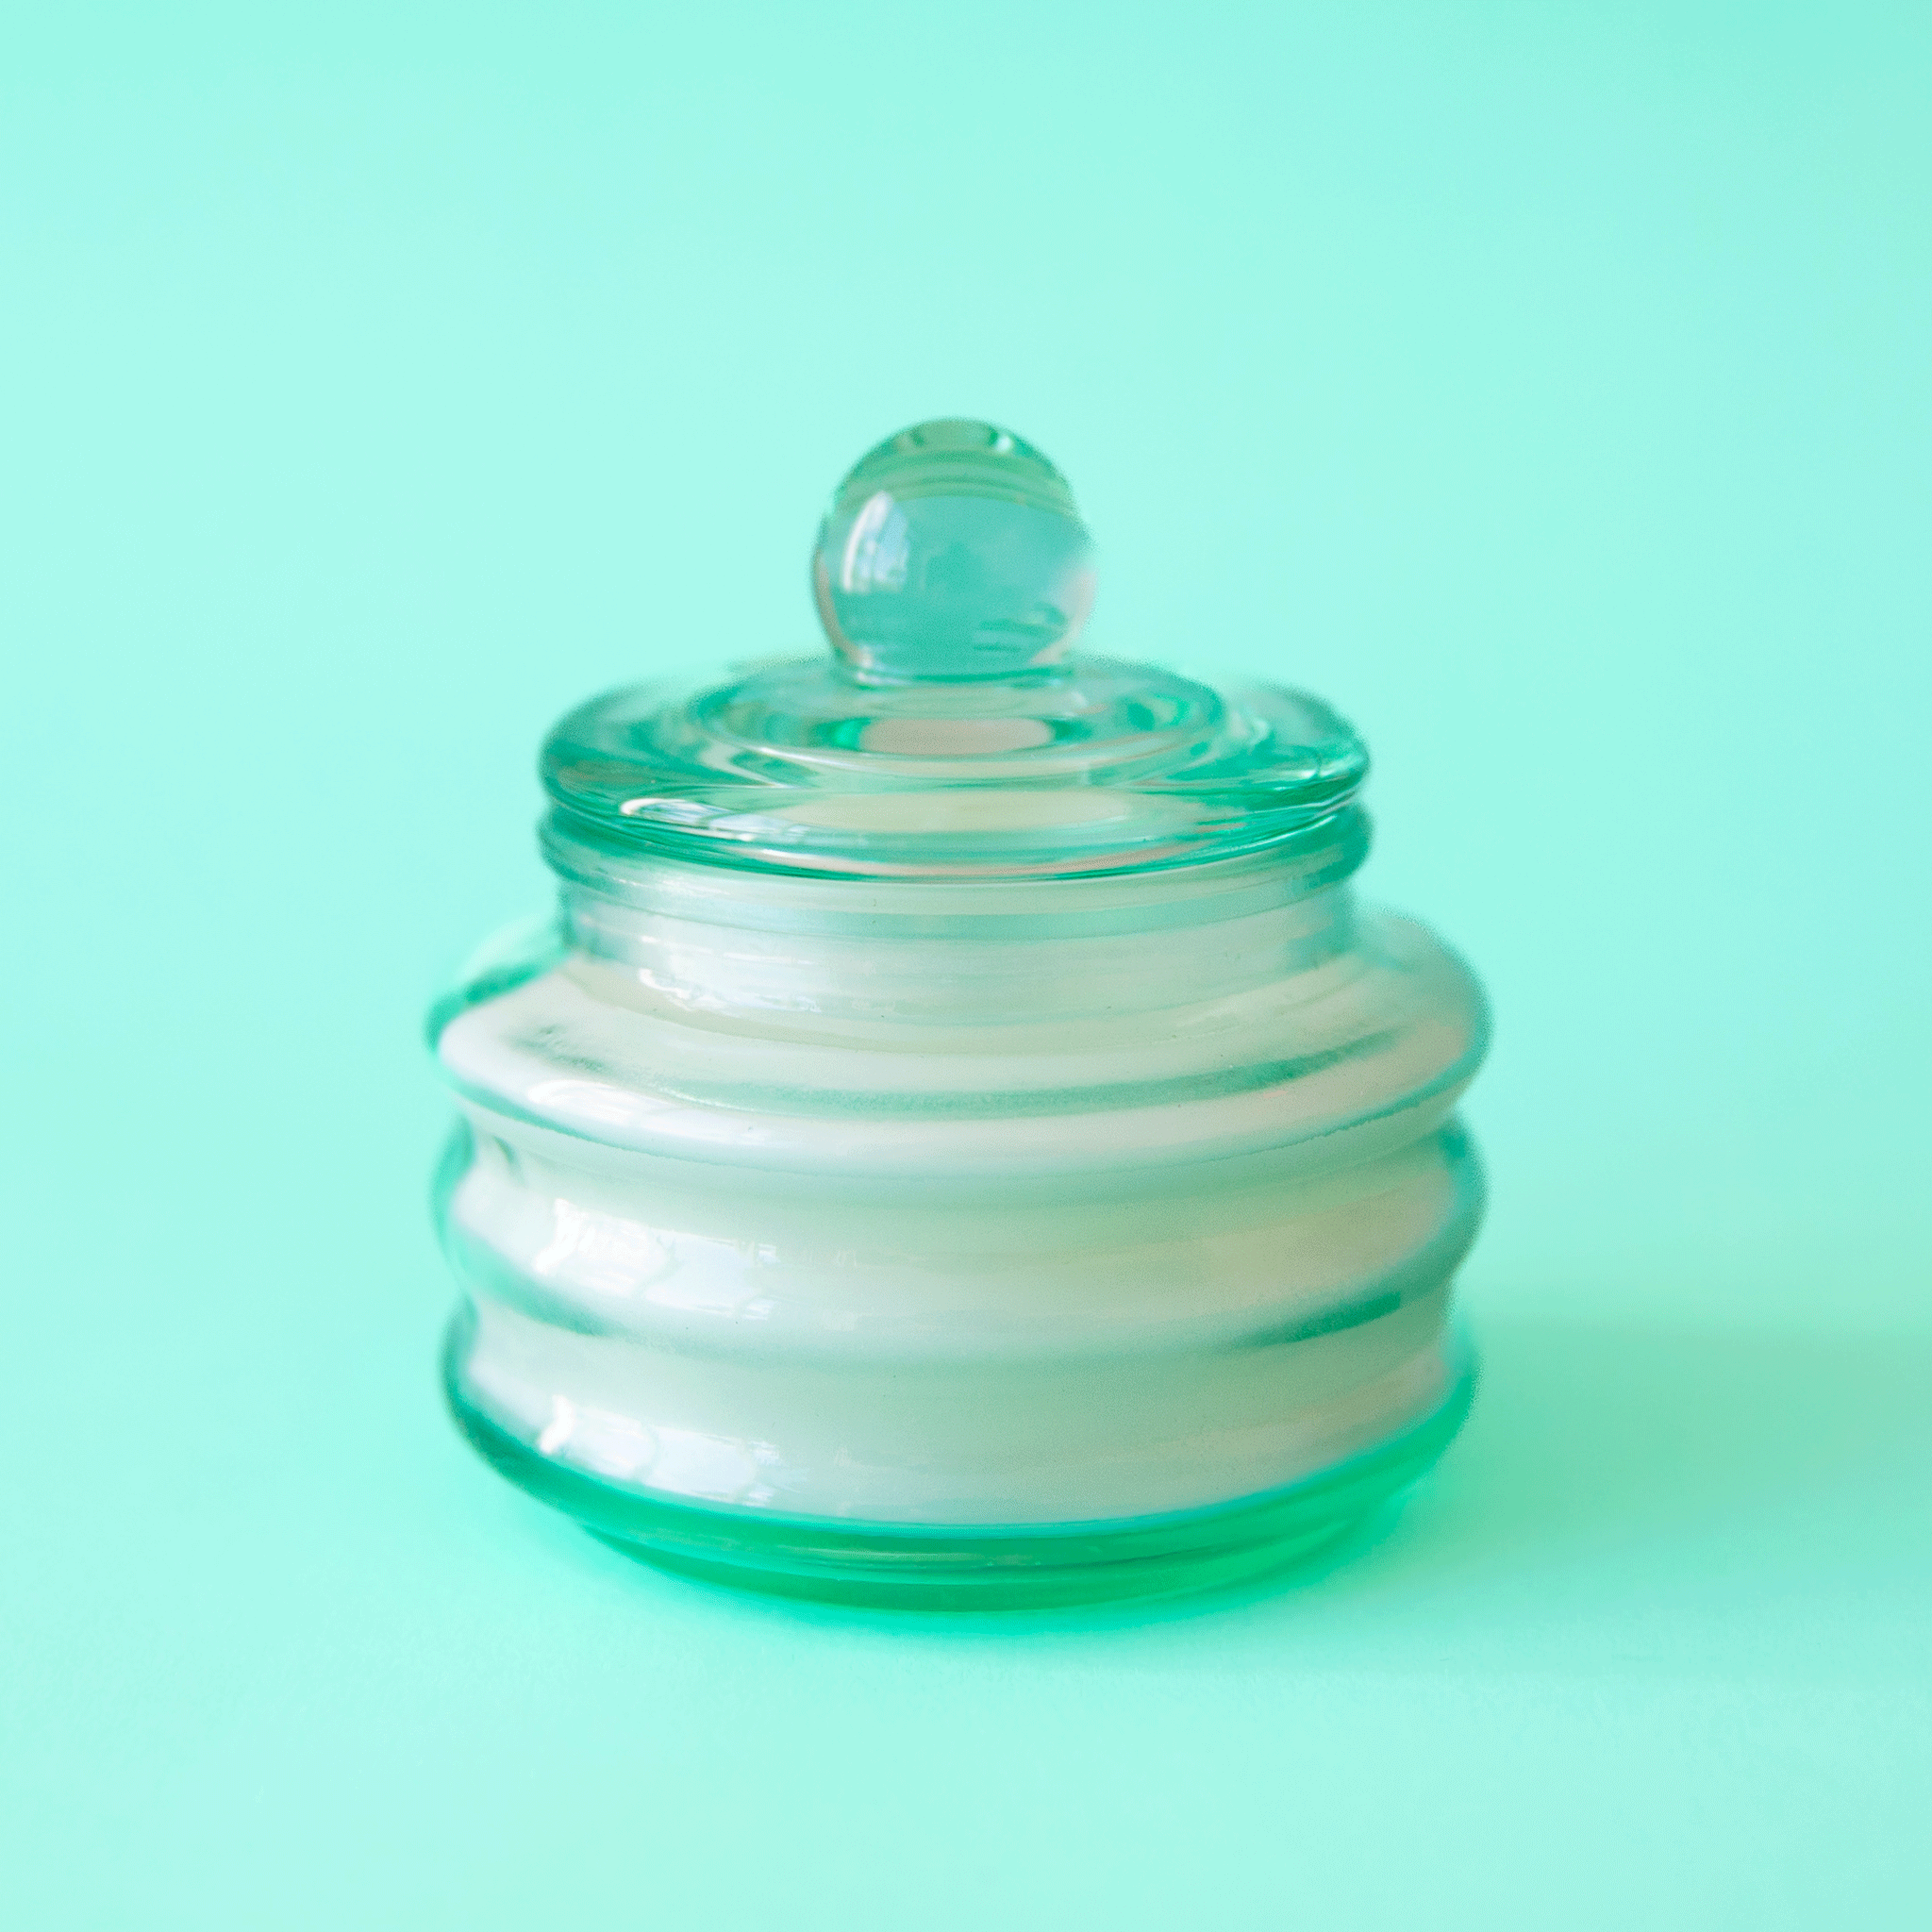 On a turquoise background is a glass jar candle with a lid. 